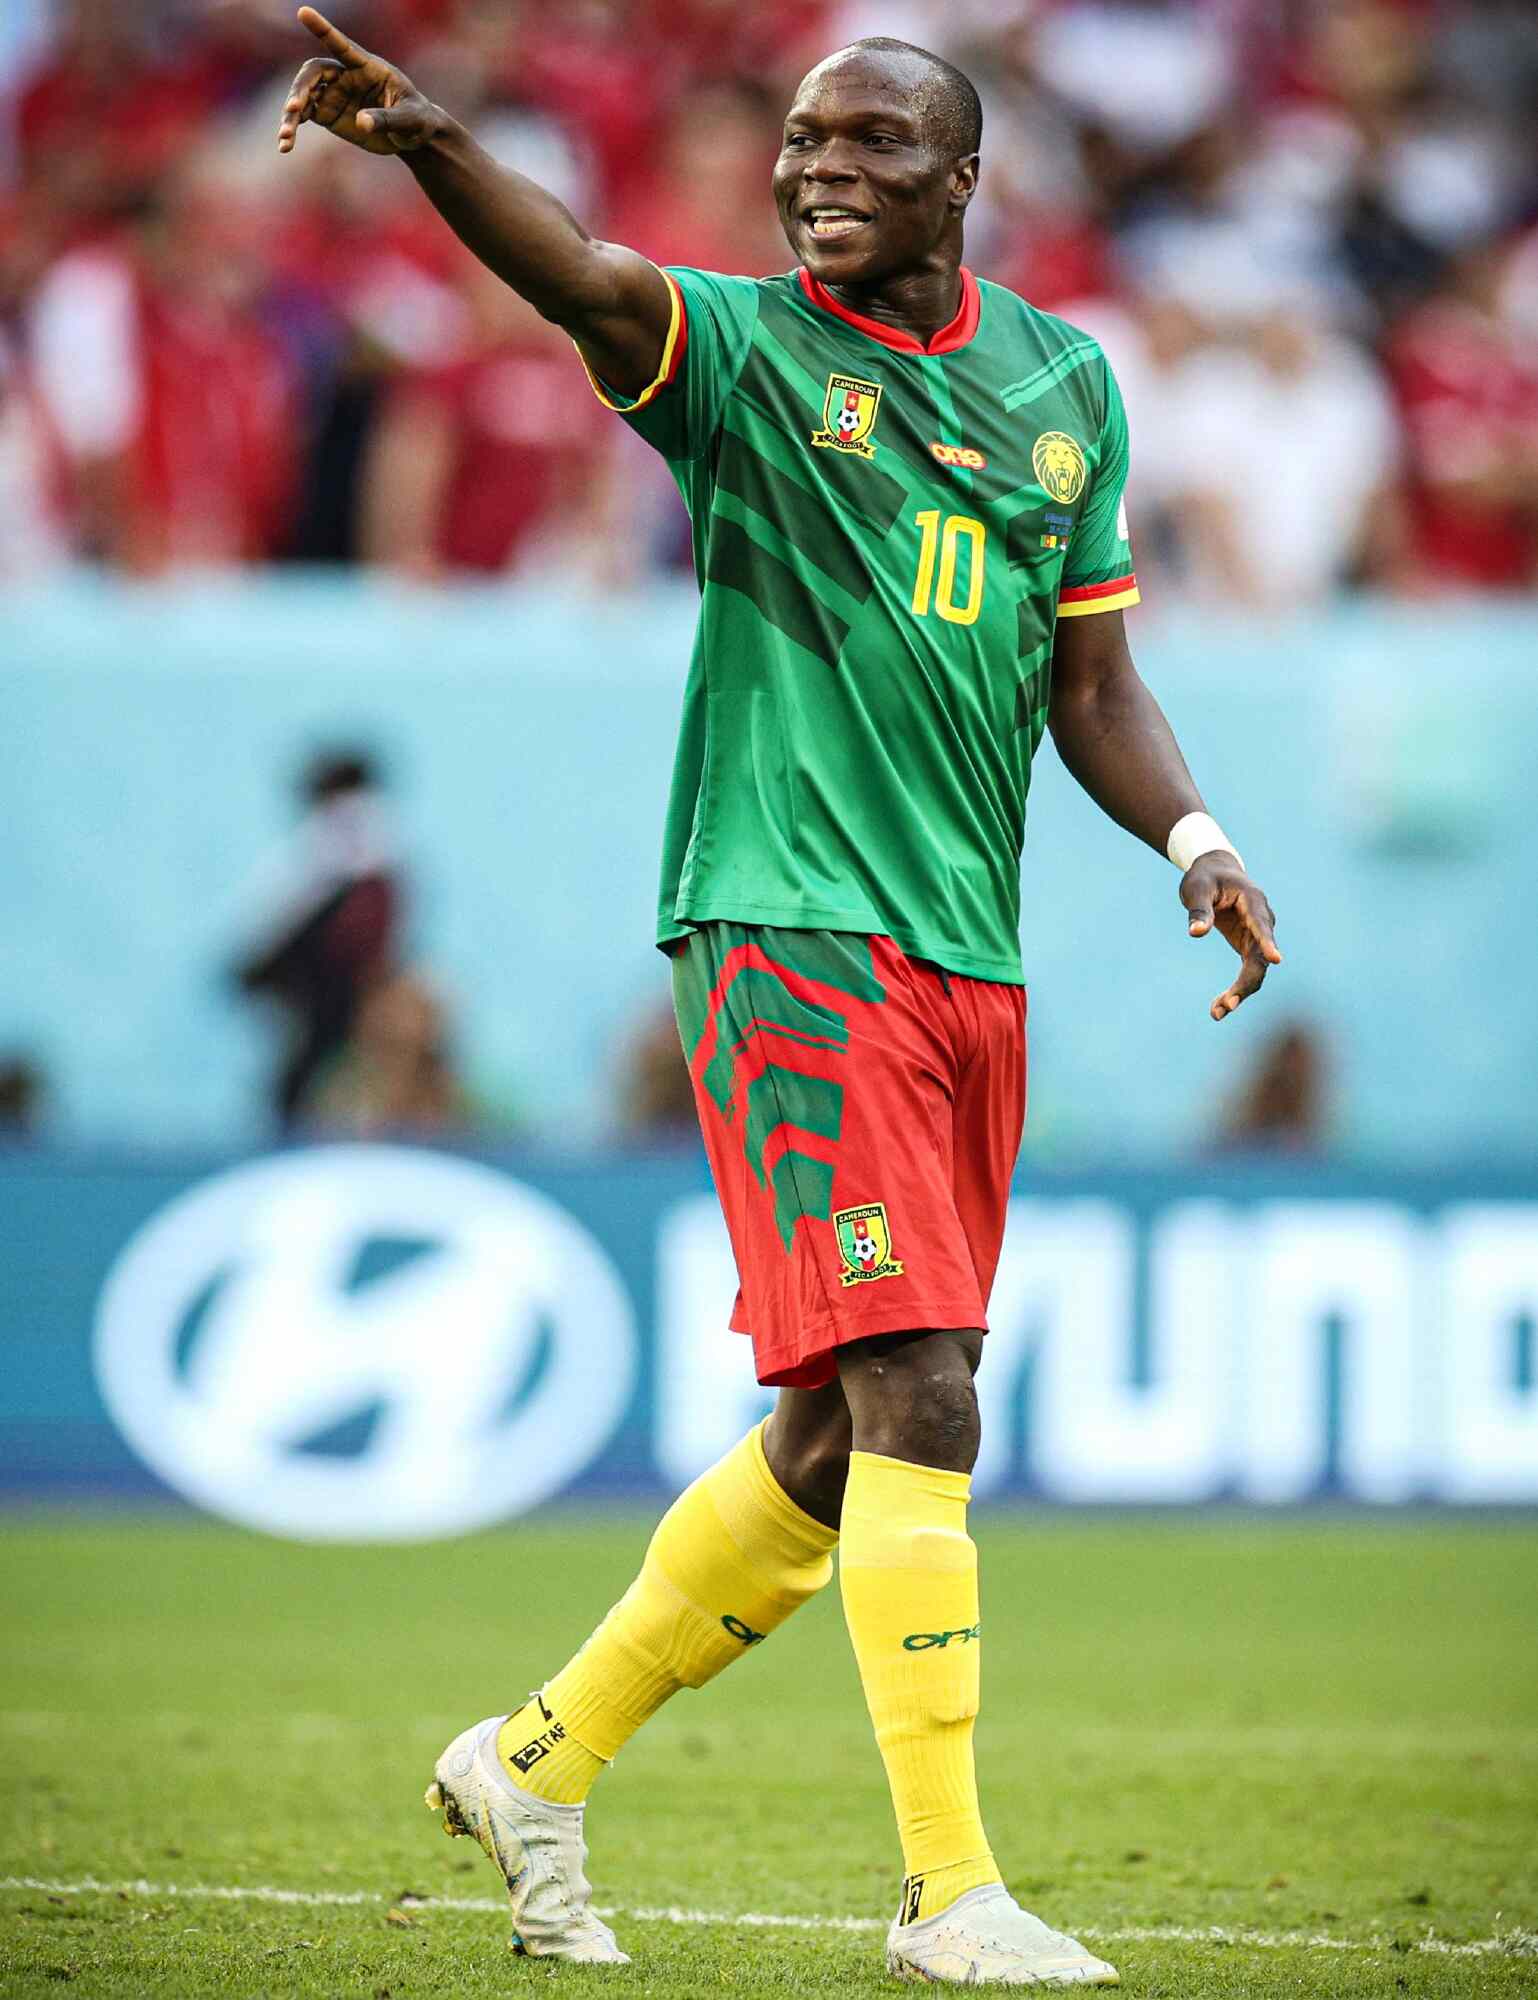 Vincent Aboubakar scores a beautiful goal as Cameroon draws 3-3 with Serbia